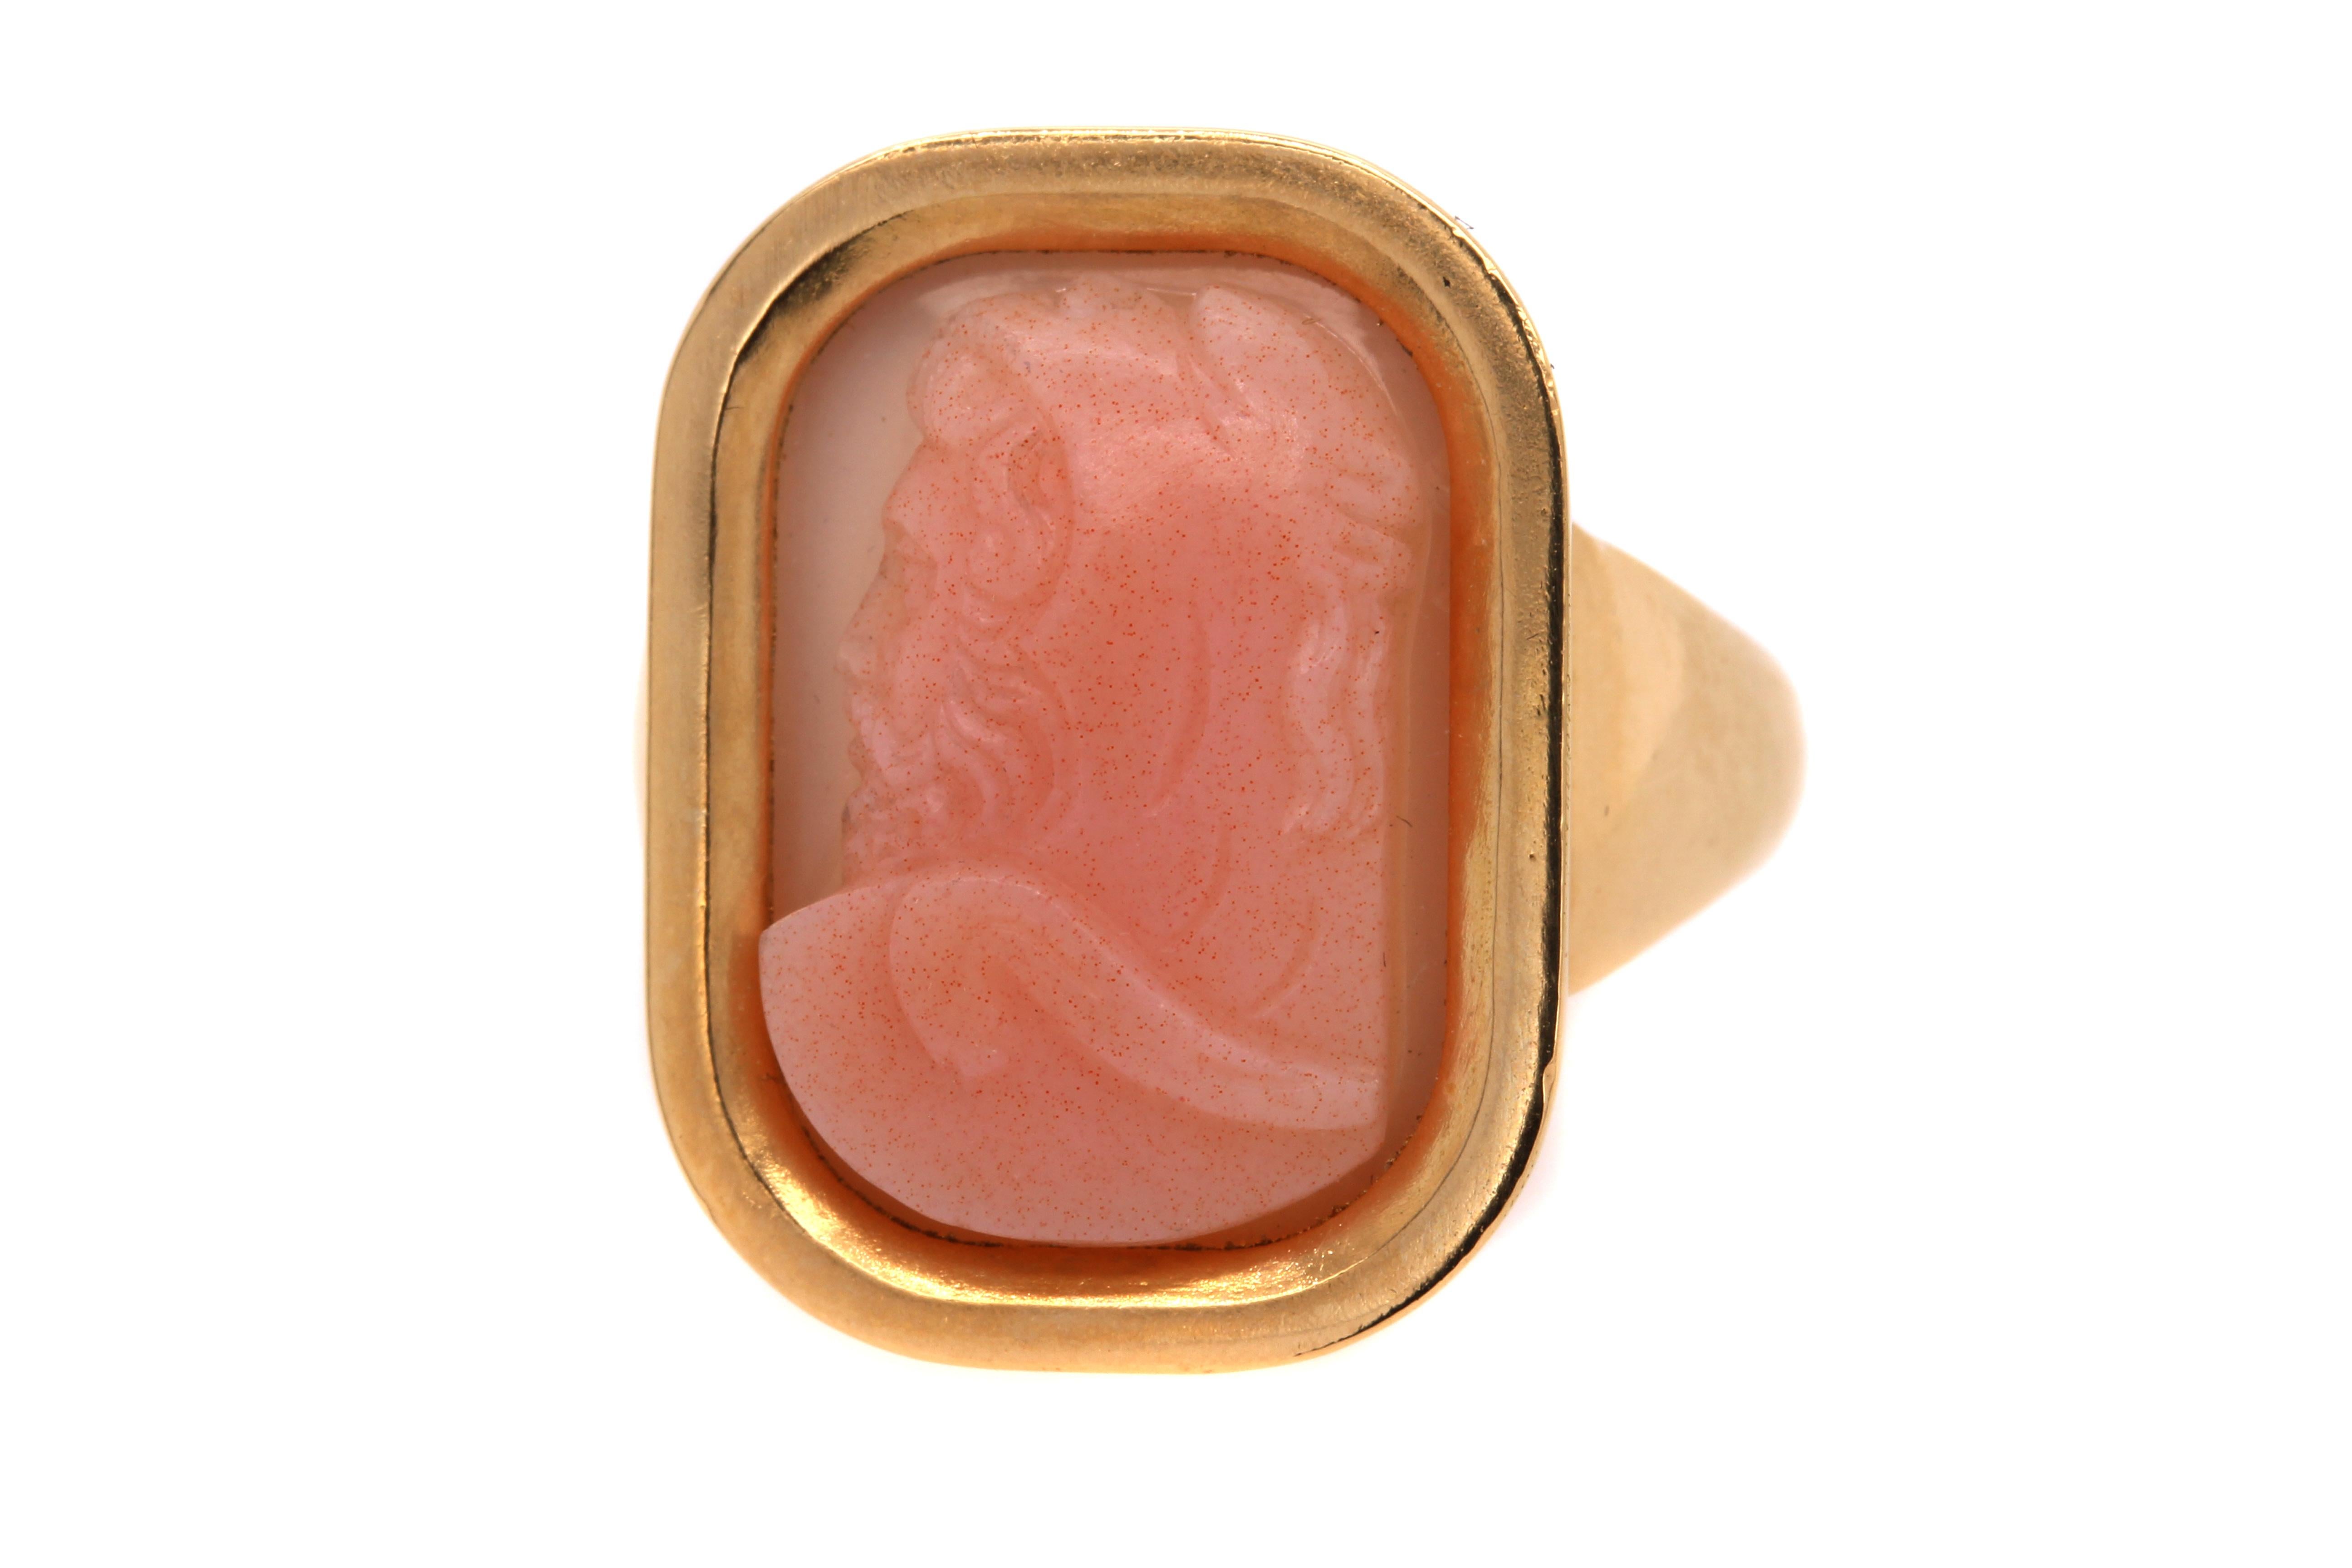 An interesting Pink color agate 19th Century cameo depicting Hercules and the Nemean Lion (on Hercules’ head). Nemean Lion symbolizes the need to have a strong exterior and not let others sway you.
The relief if the carving shows the details of